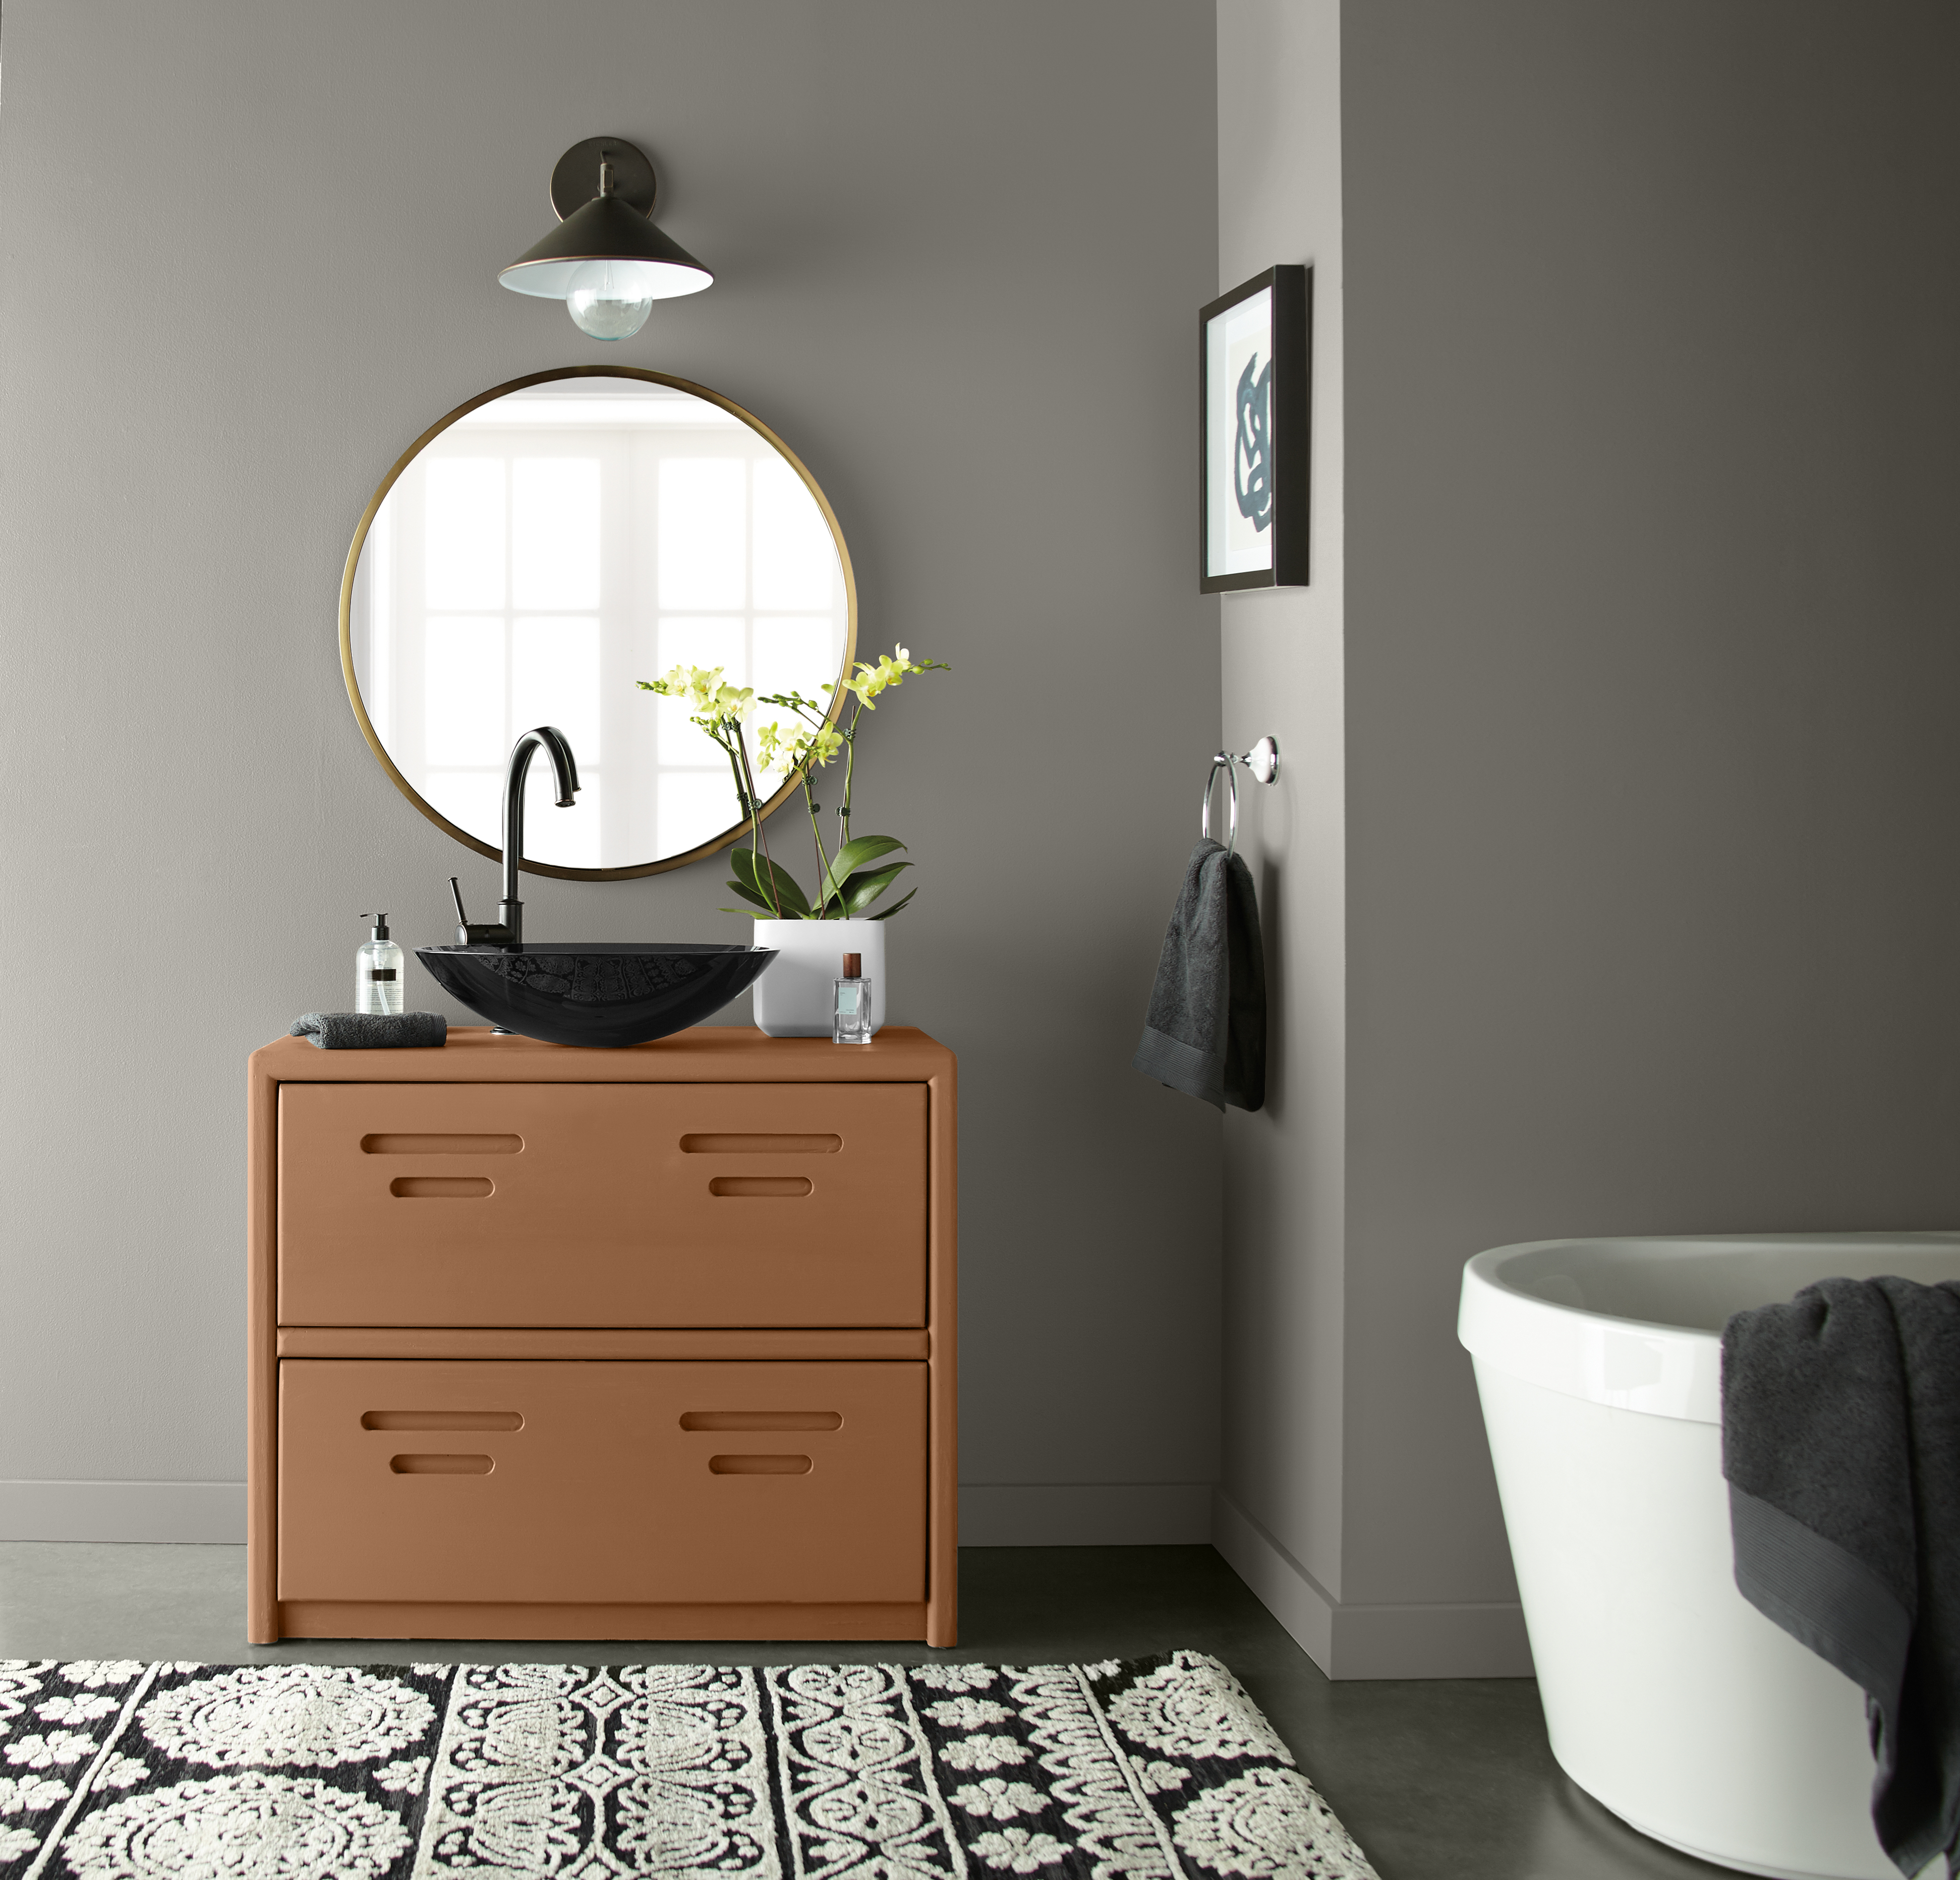 An eclectic gray bathroom with a round cotemporary  bath tub  and a unique and interesting vanity painted in an earthy orange color called Maple Glaze. 